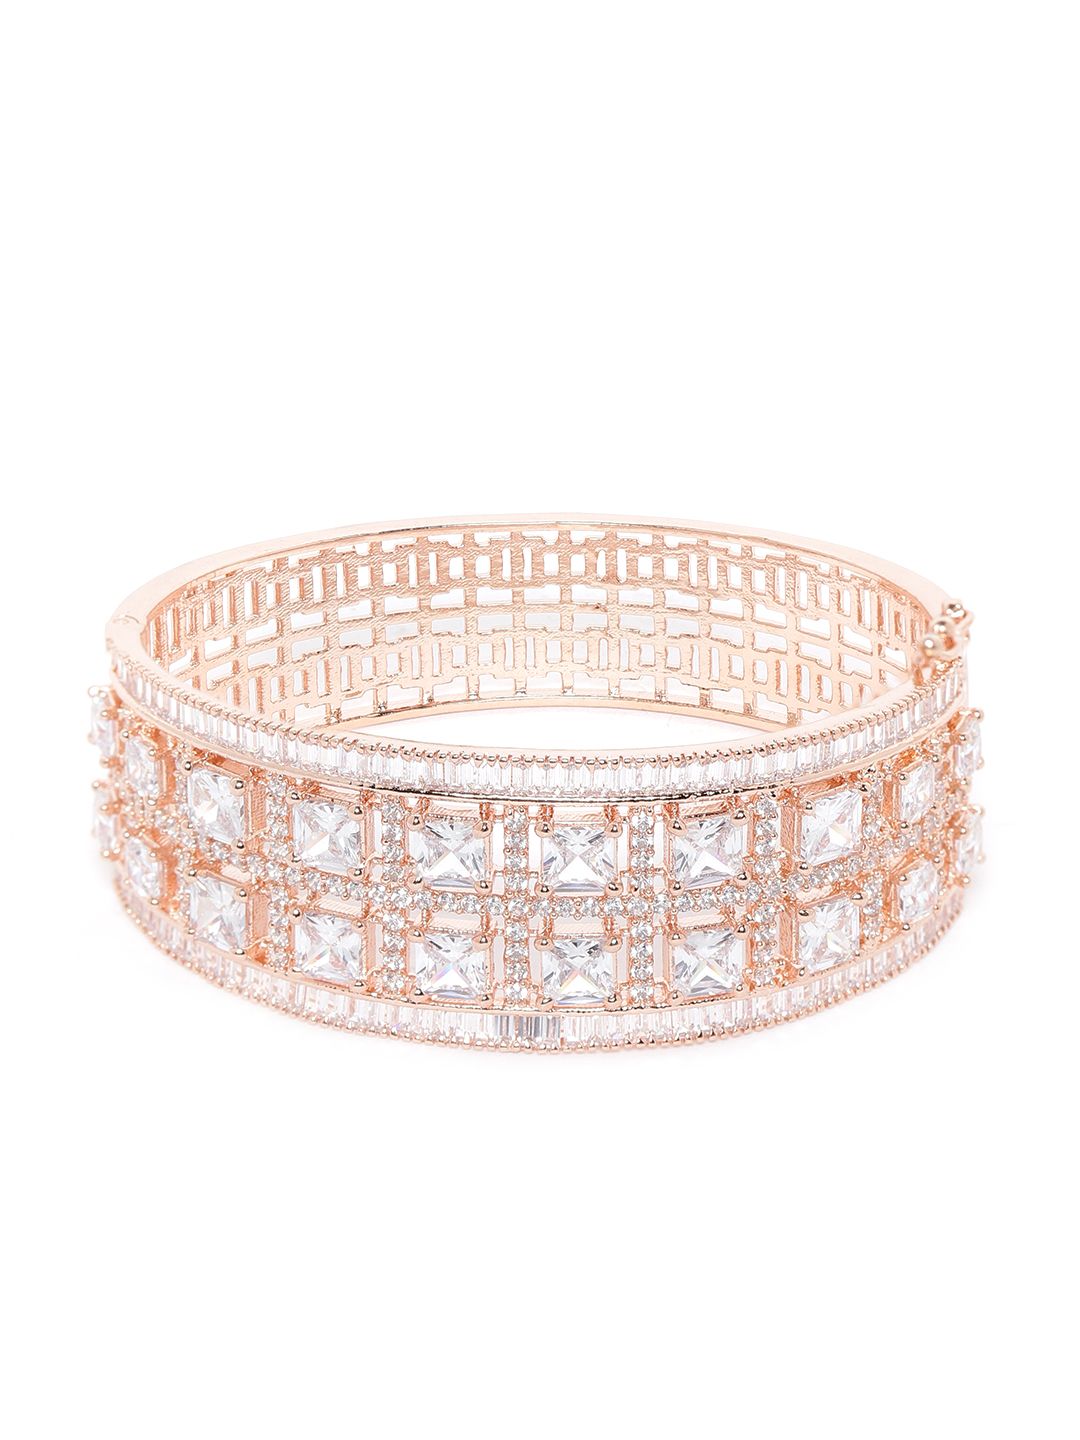 JEWELS GEHNA Rose Gold-Plated Handcrafted AD-Studded Bangle-Style Bracelet Price in India